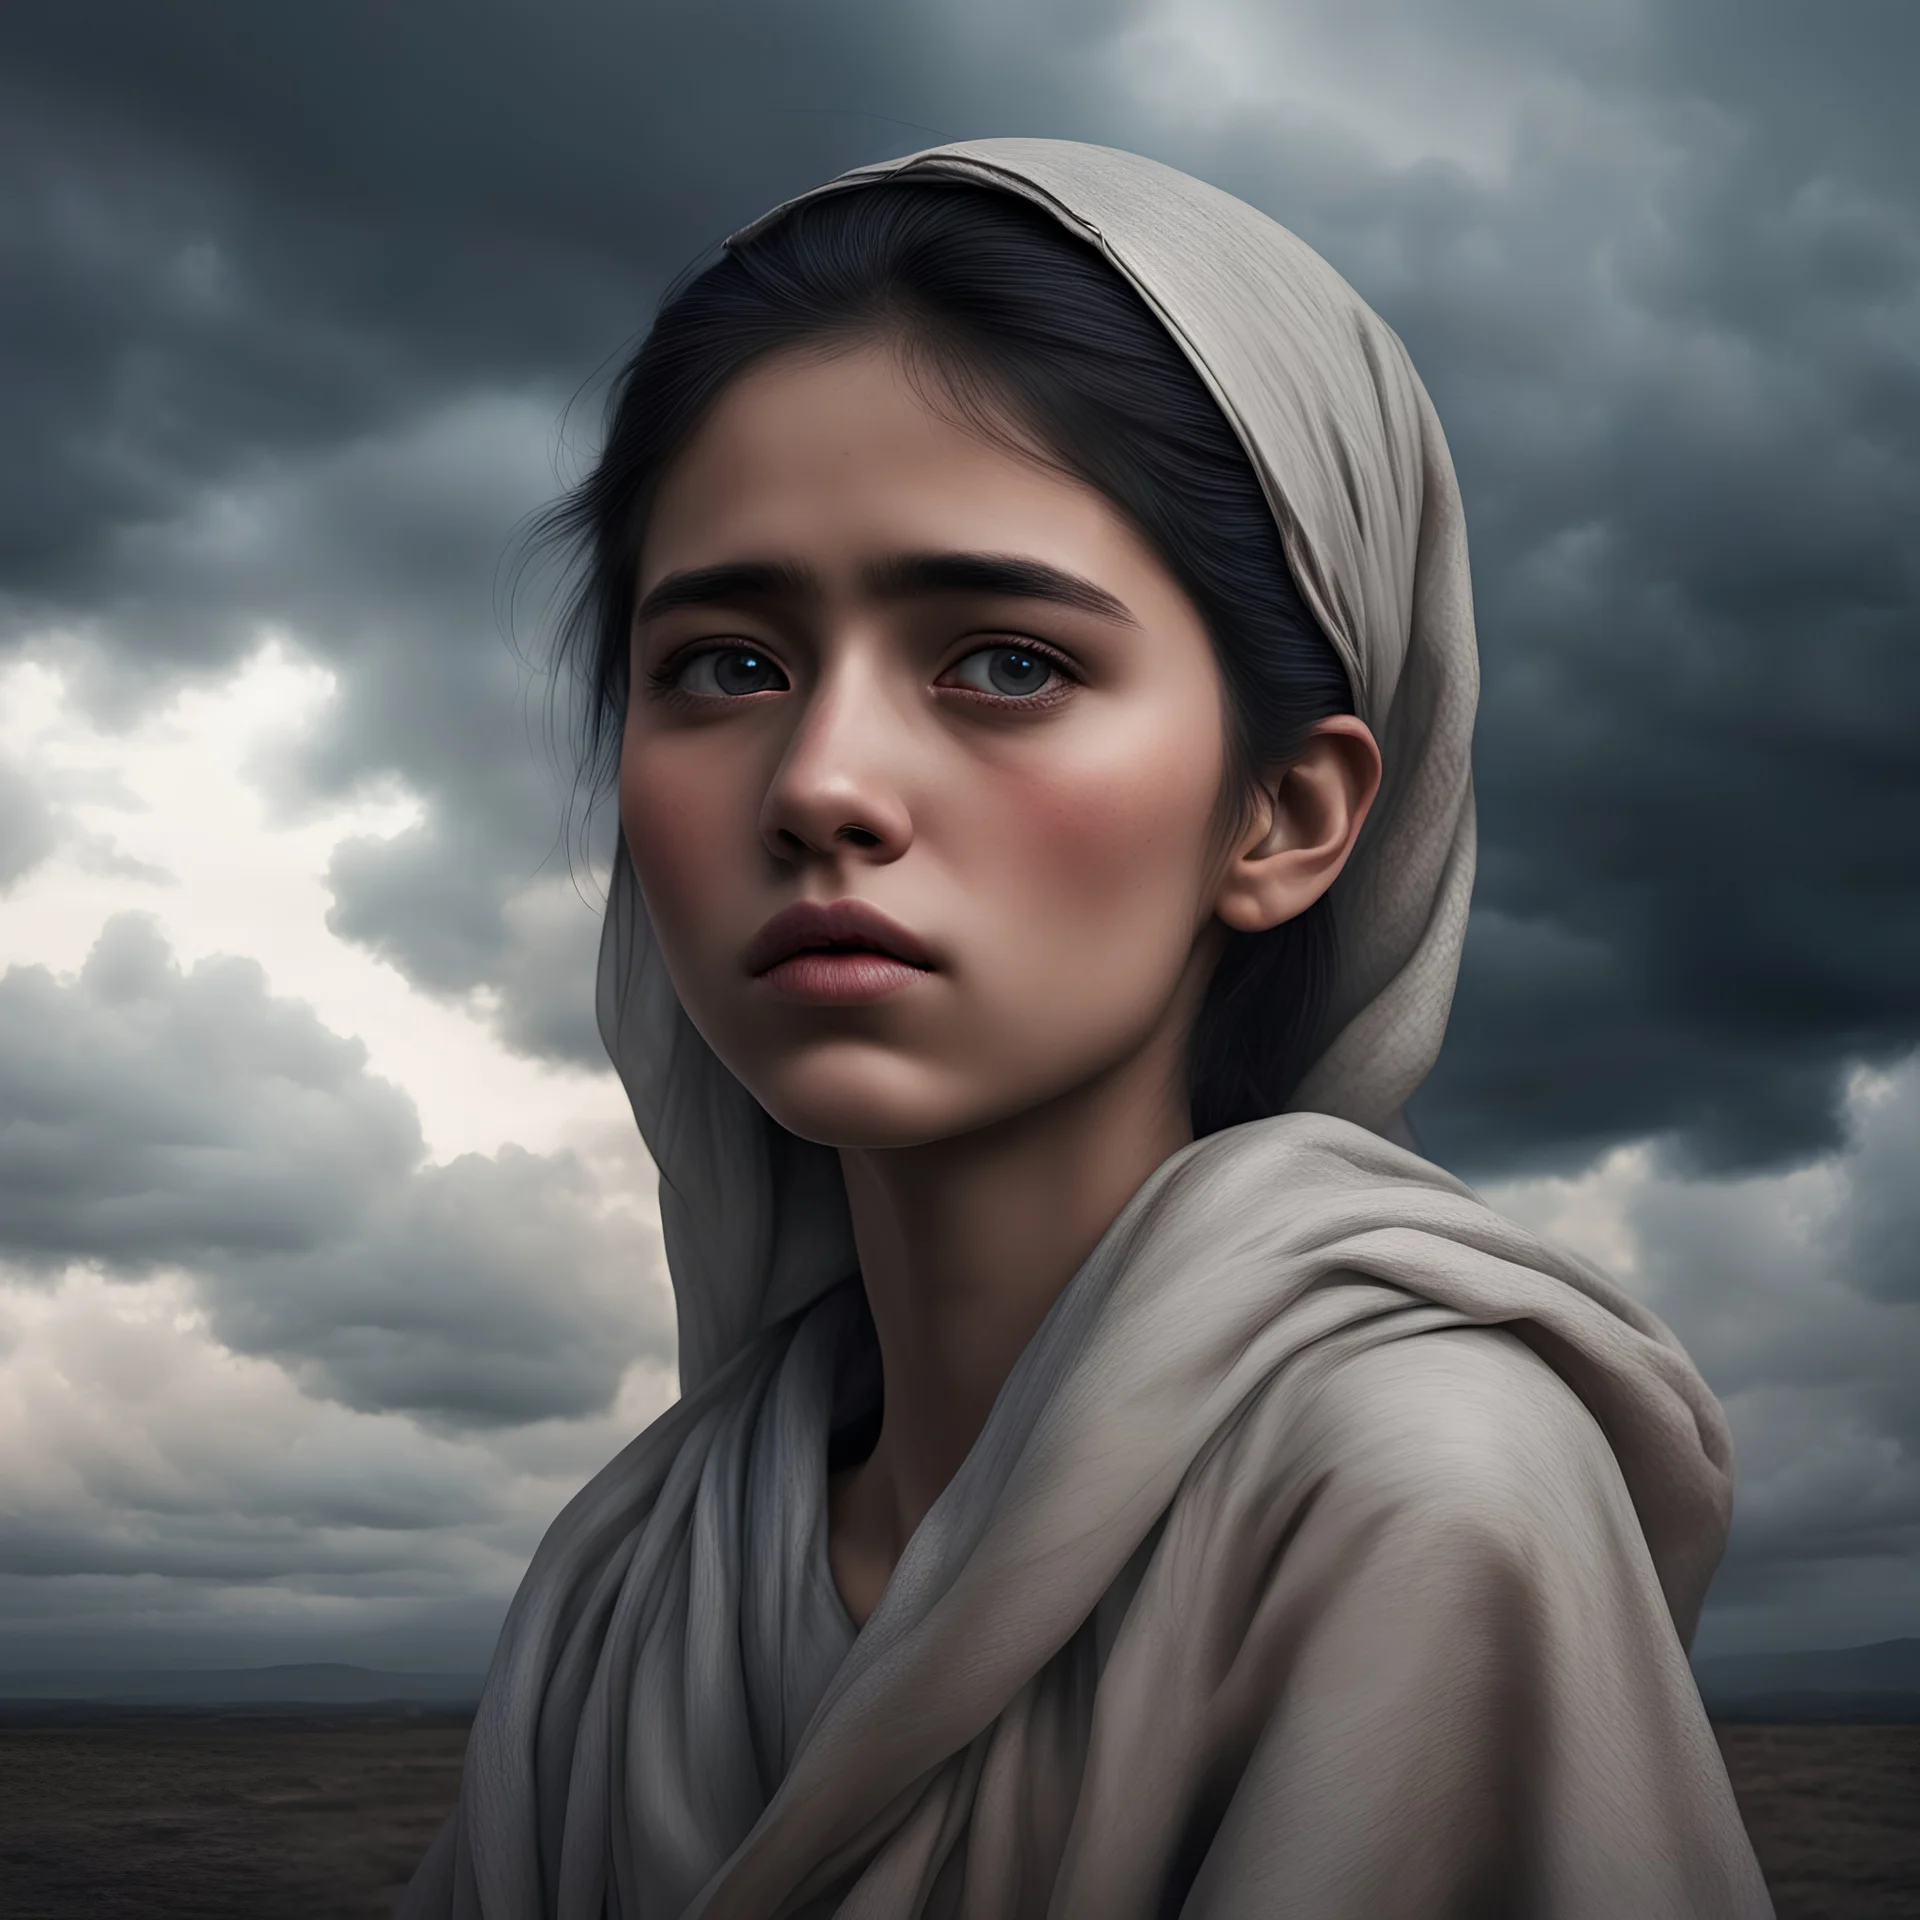 Hyper Realistic Sad Pushto Girl with cloudy sky & dramatic ambiance